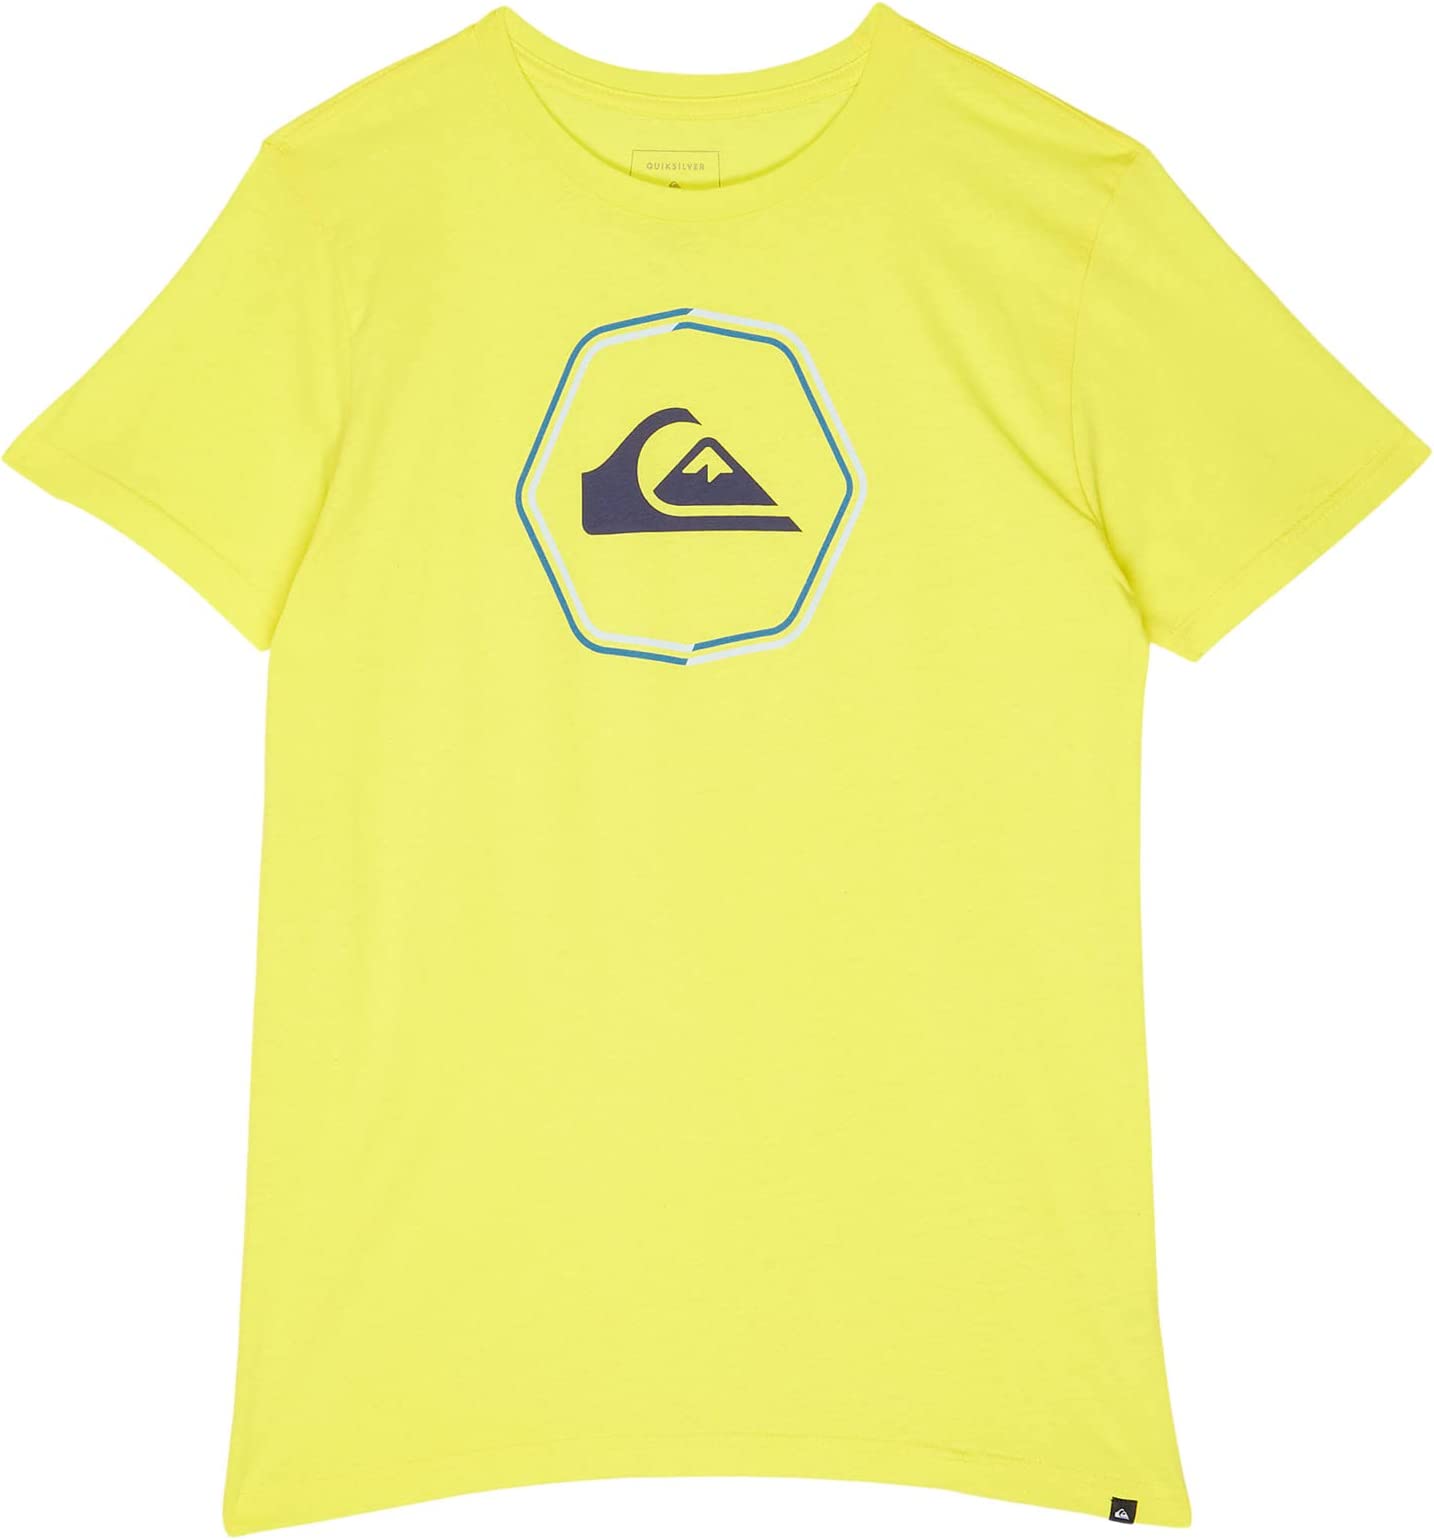 Quiksilver Kids Delivery (Big | Free Lines Kids) quiksurfshop.com Tee sale ○ on Thin